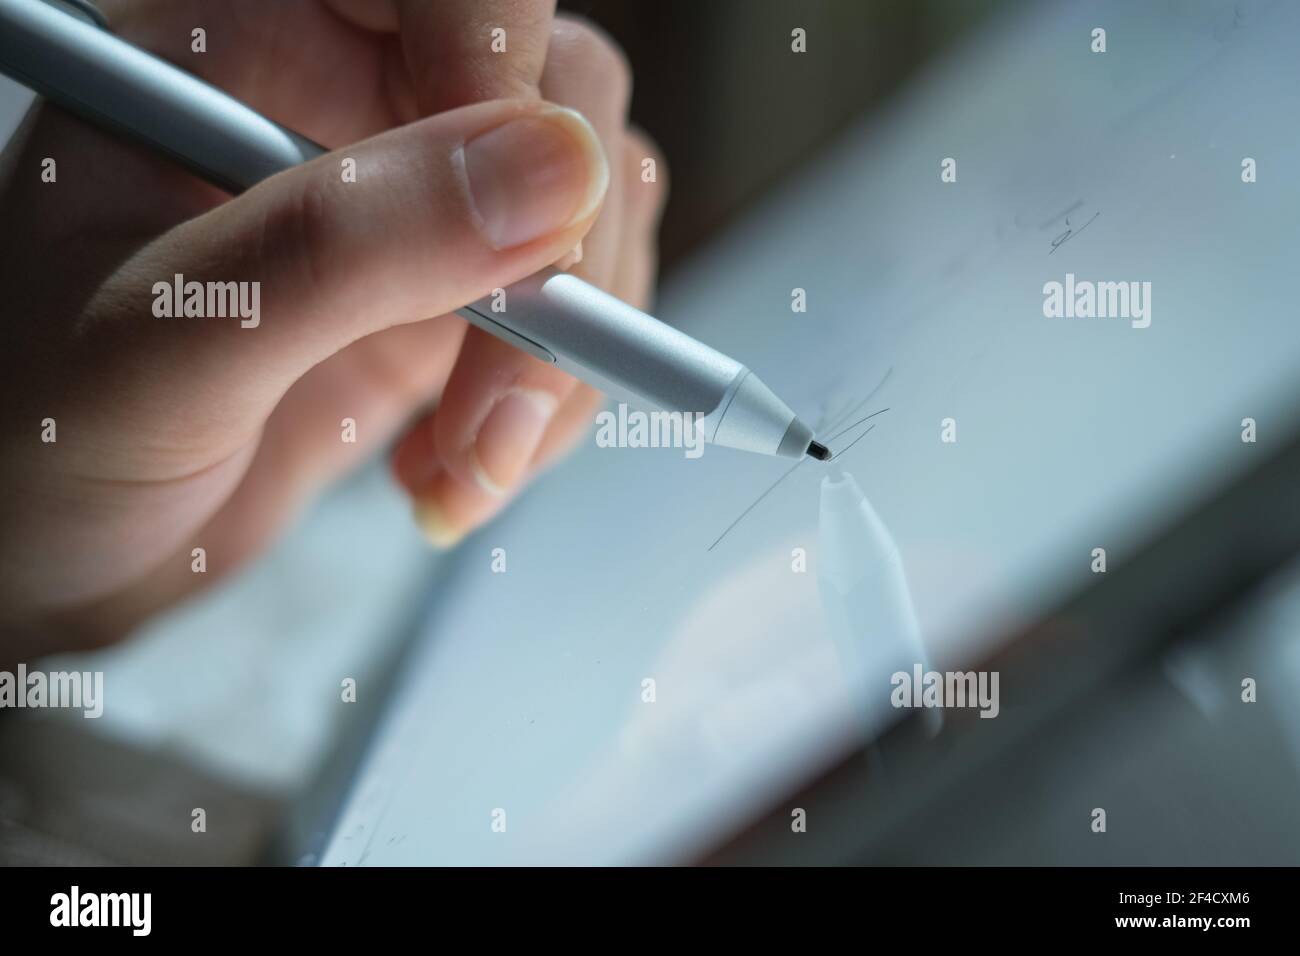 Woman hand view while using graphics tablet stylus for home smart working,digital technology Stock Photo